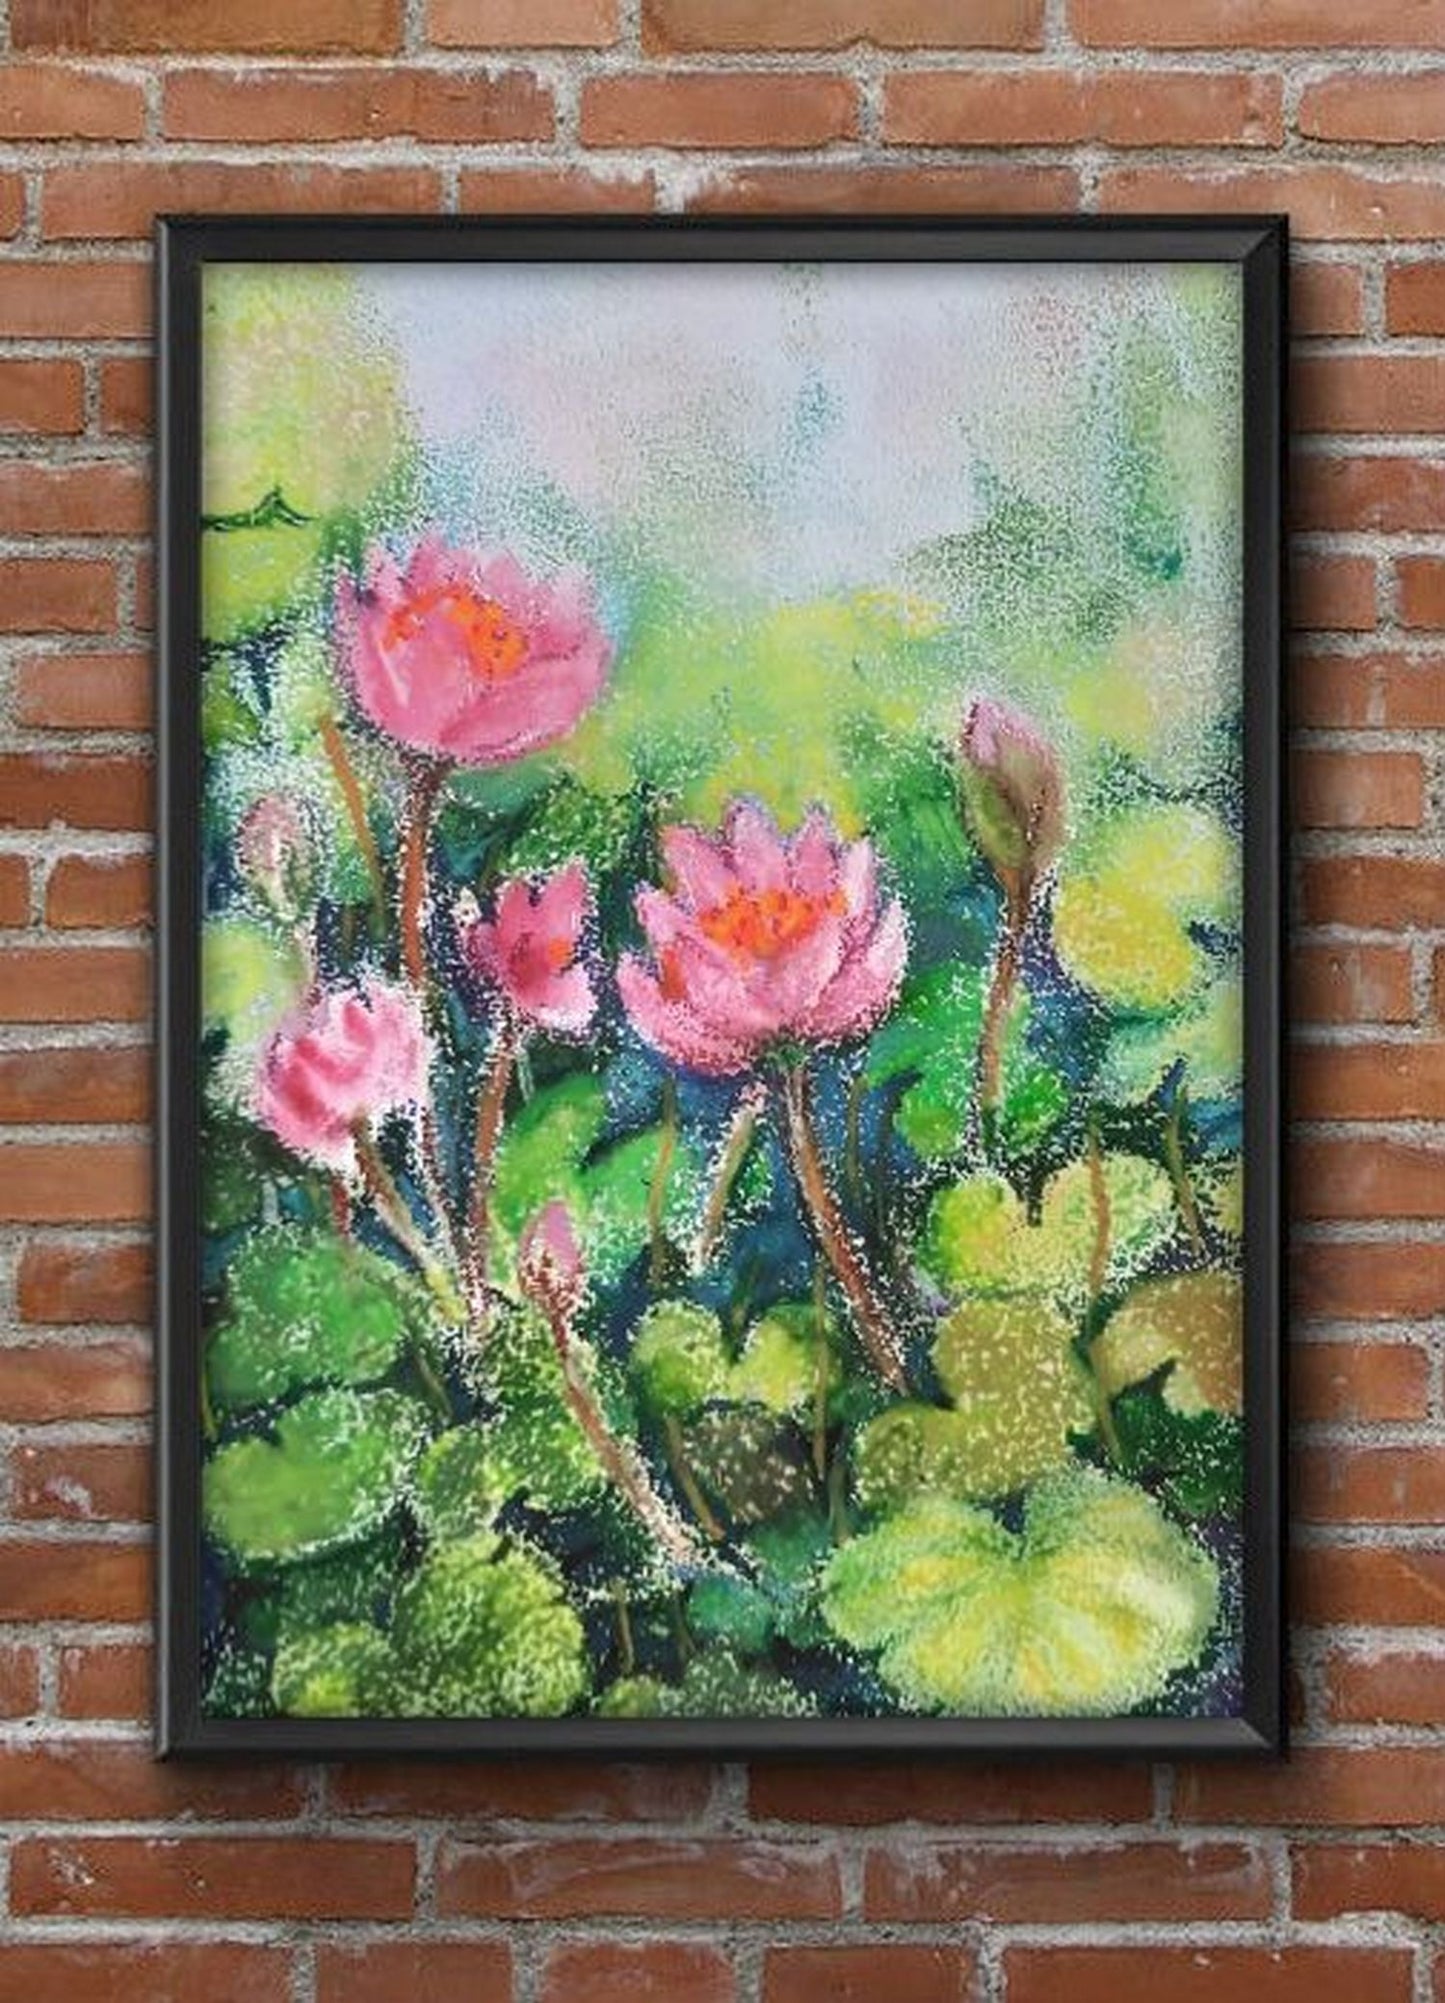 Virtual frame and wall view, Lotus flowers in a Pond, mixed media artwork